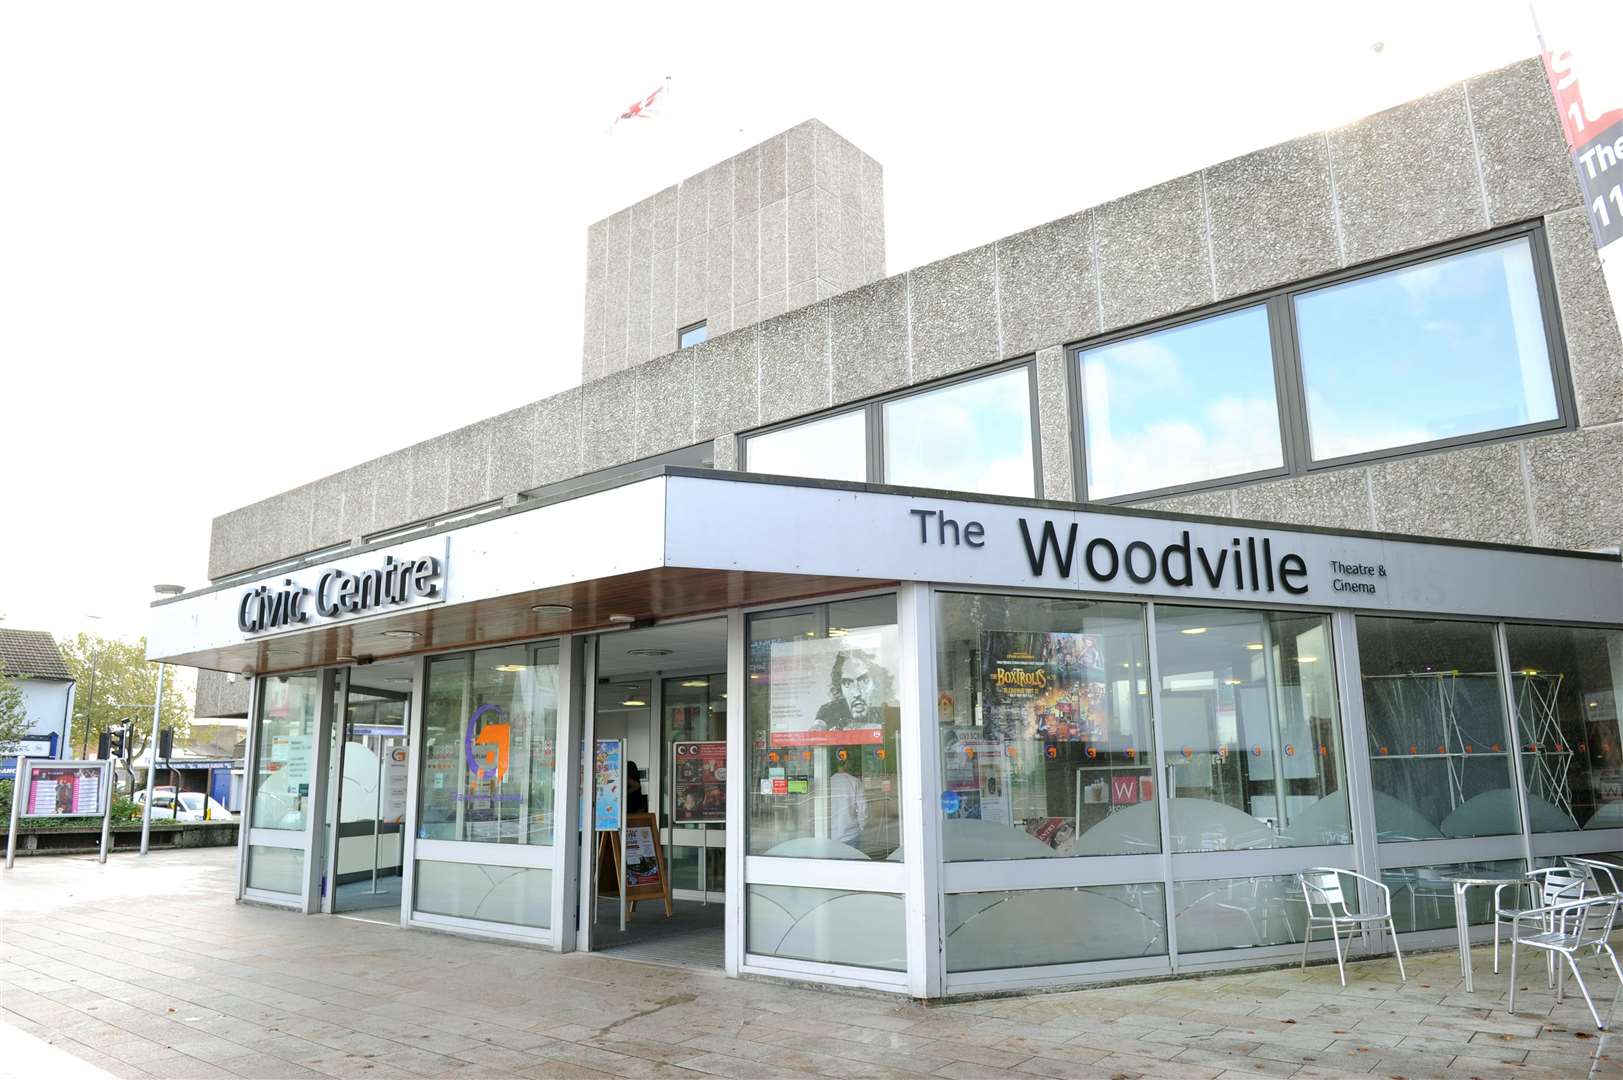 Woodville Halls, Gravesend is being opened as a mass vaccine centre